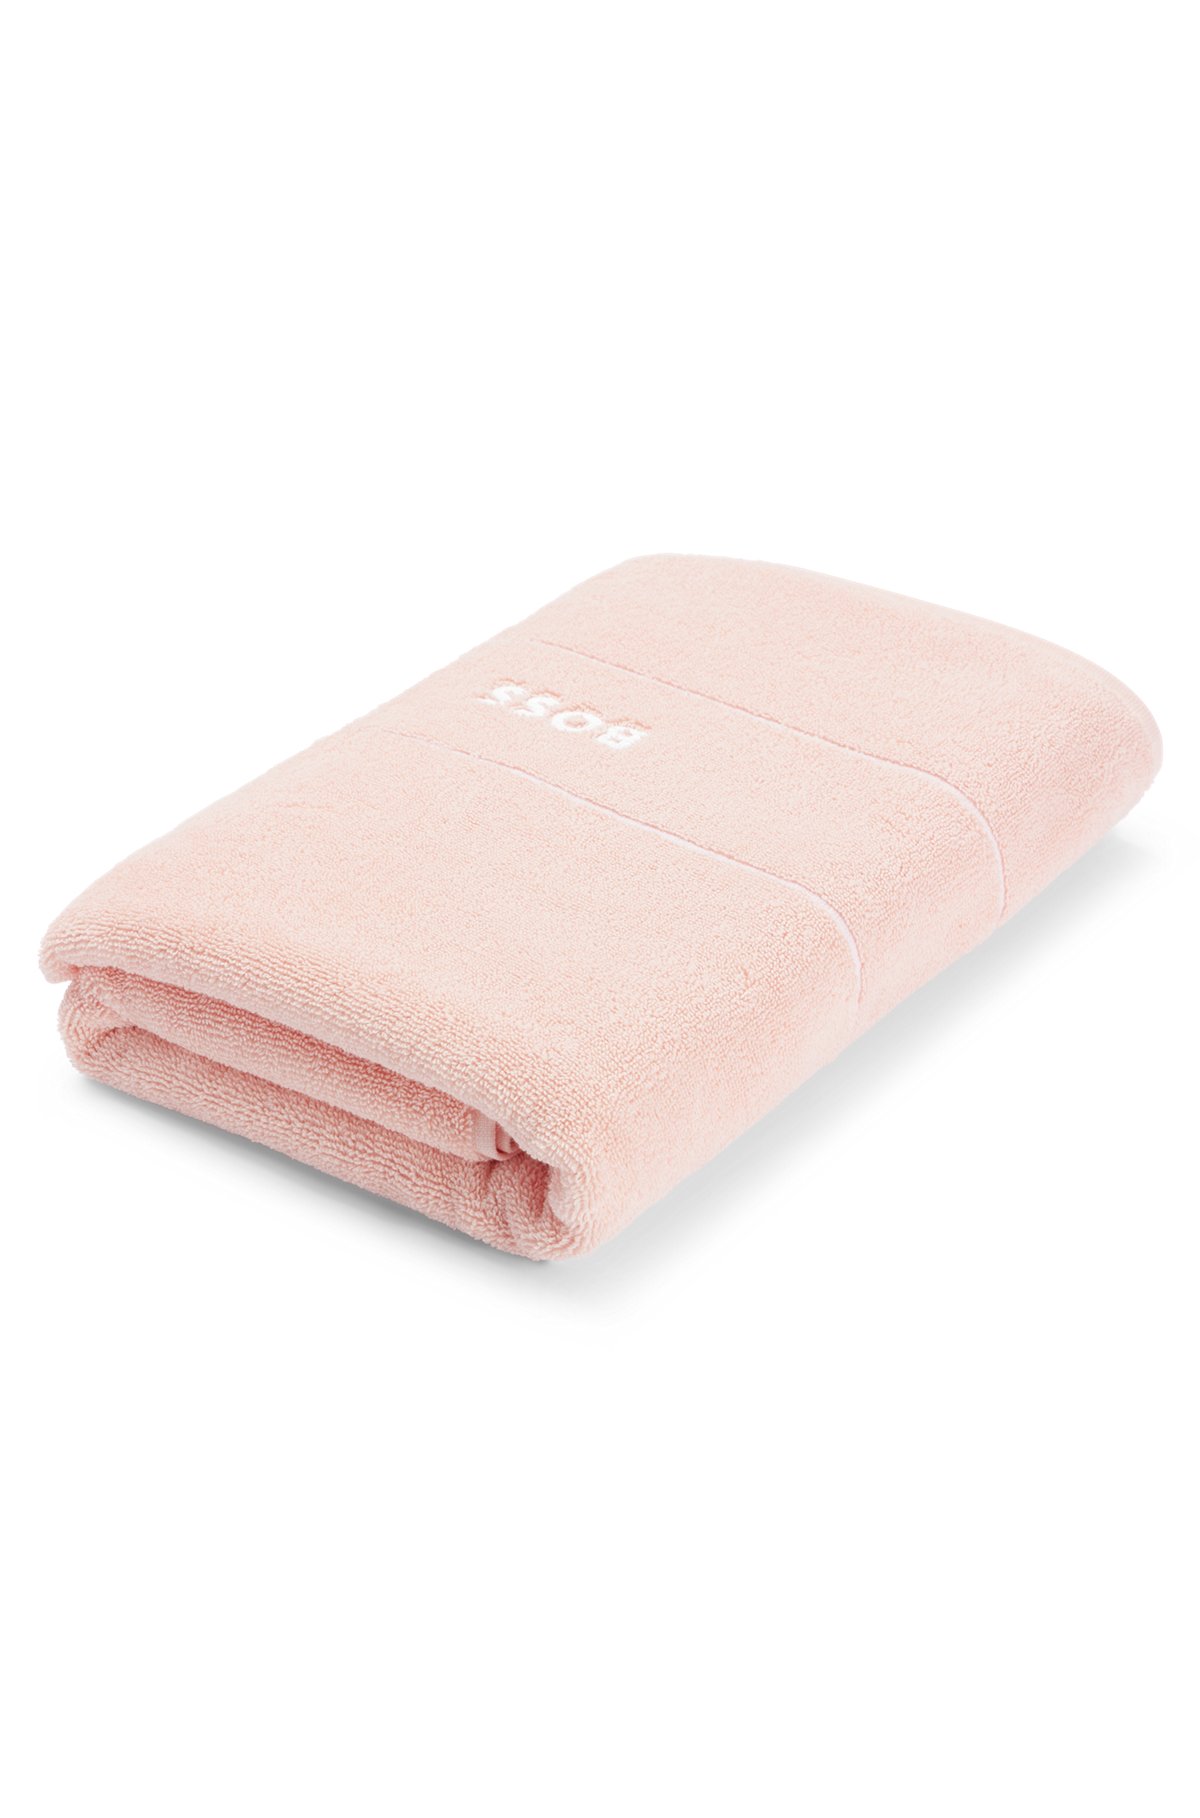 Cotton bath towel with white logo embroidery, Pink